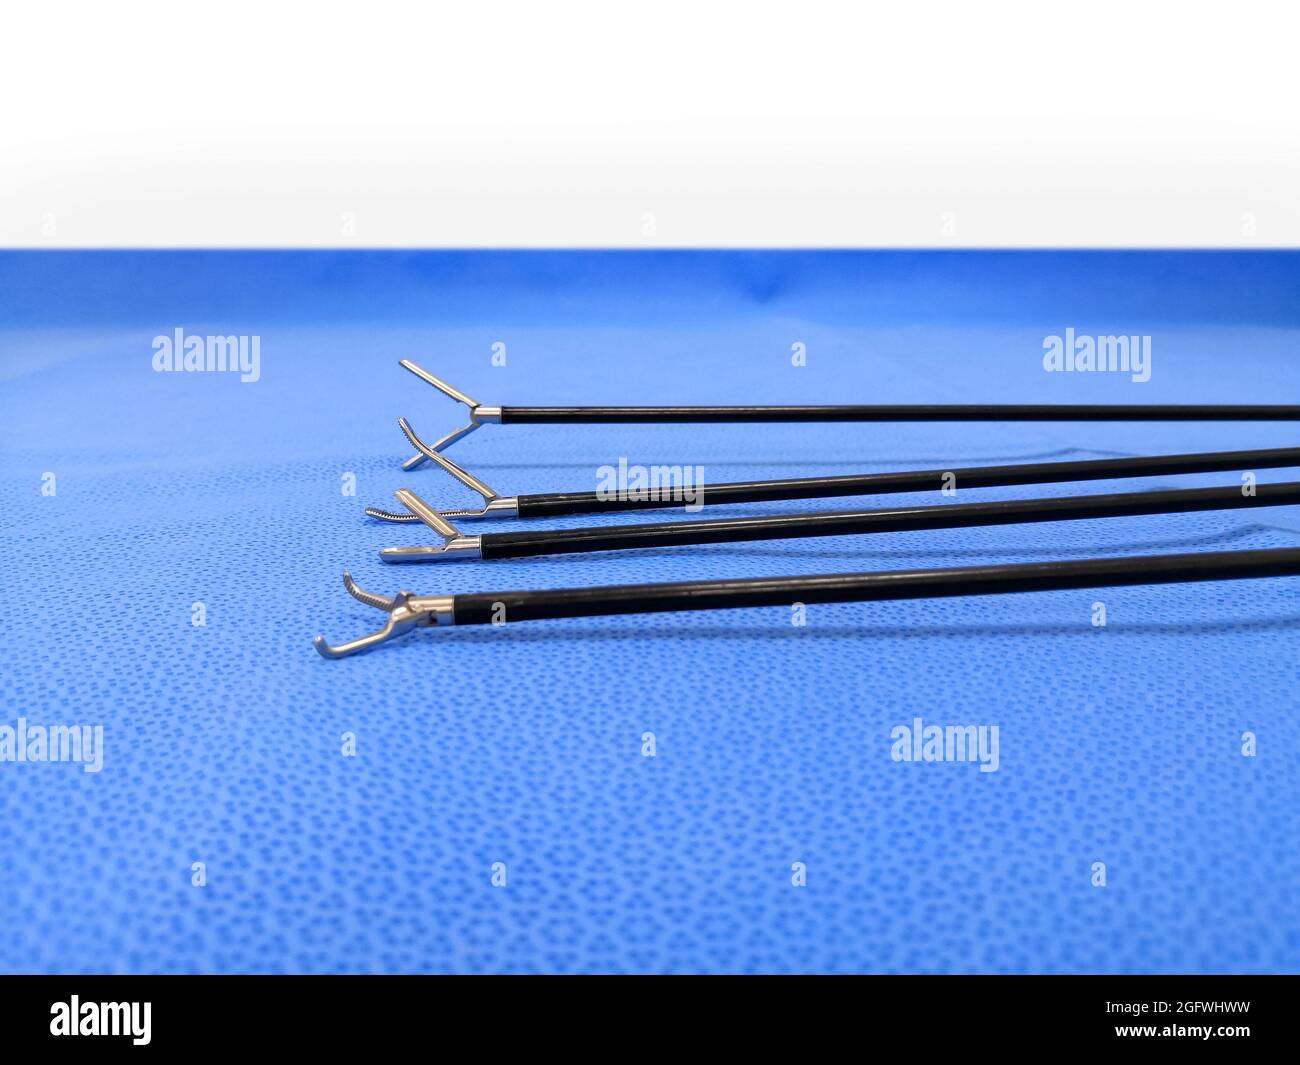 Laparoscopic Surgical Instrument Tip In Blue Background. Selective Focus To Grasper Forceps Tip Stock Photo